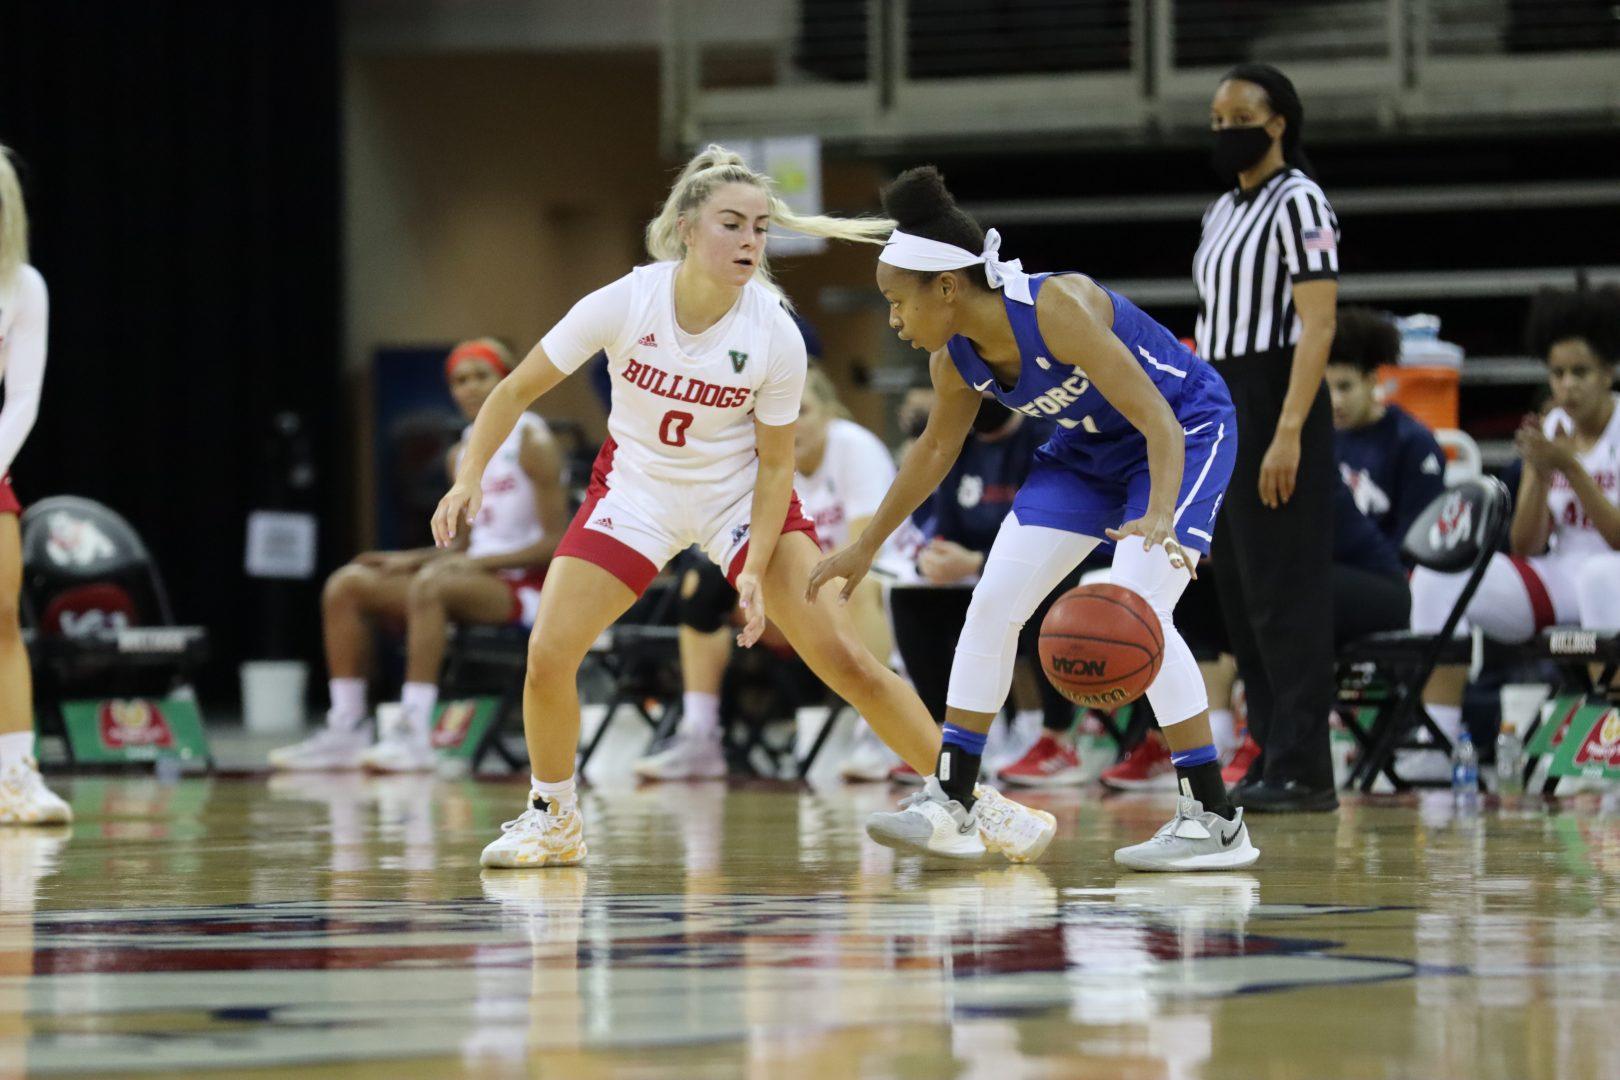 Fresno State guard Hanna Cavinder (0) guards the ball during the game against Air Force on Feb. 10, 2021, at the Save Mart Center. (Kameron Thorn / The Collegian)